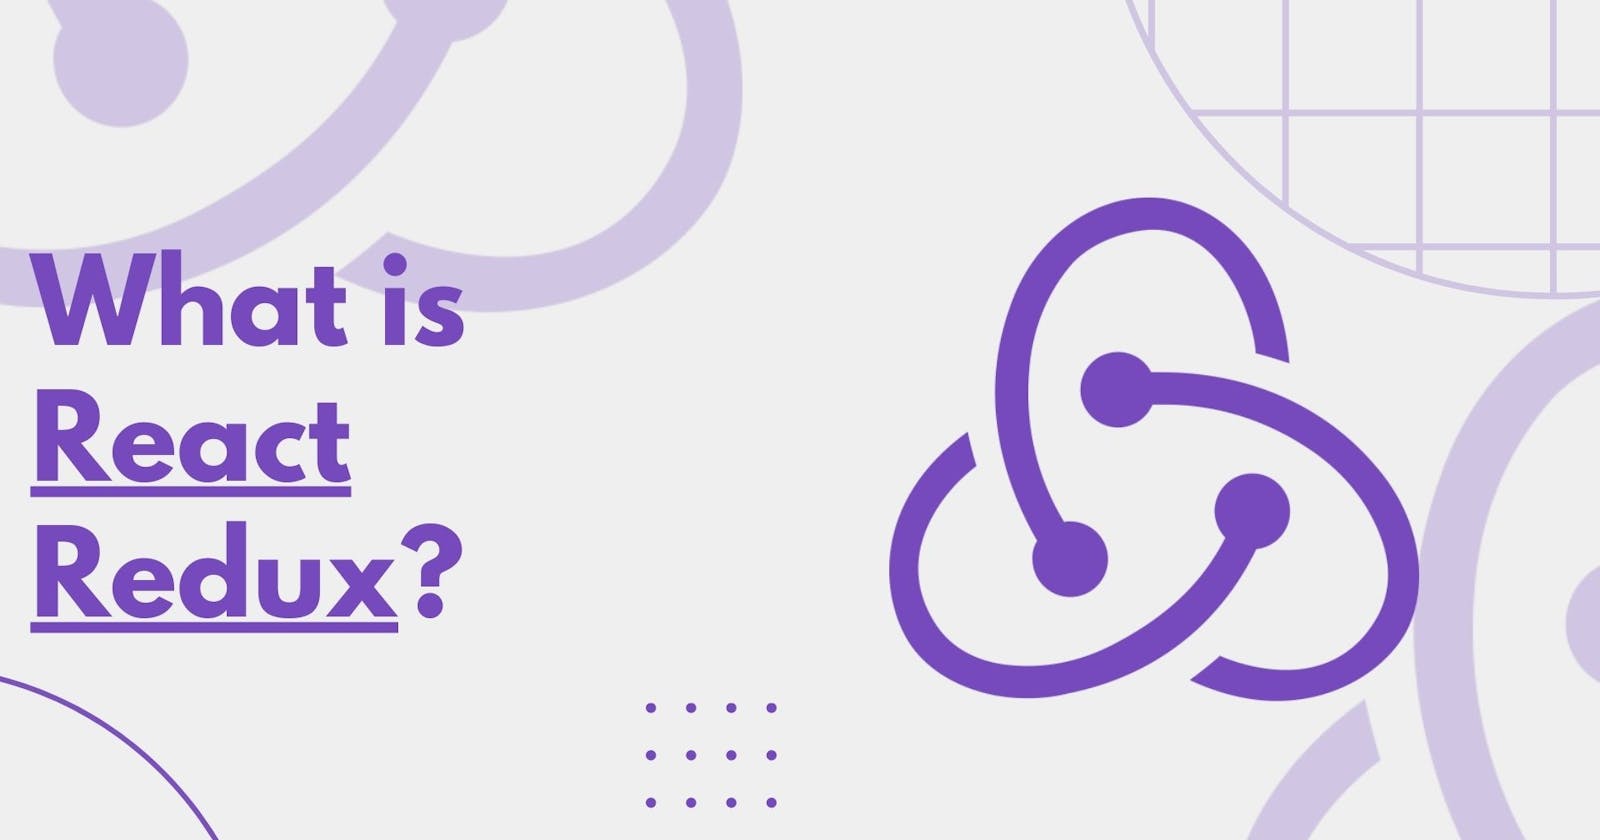 What Is React Redux?